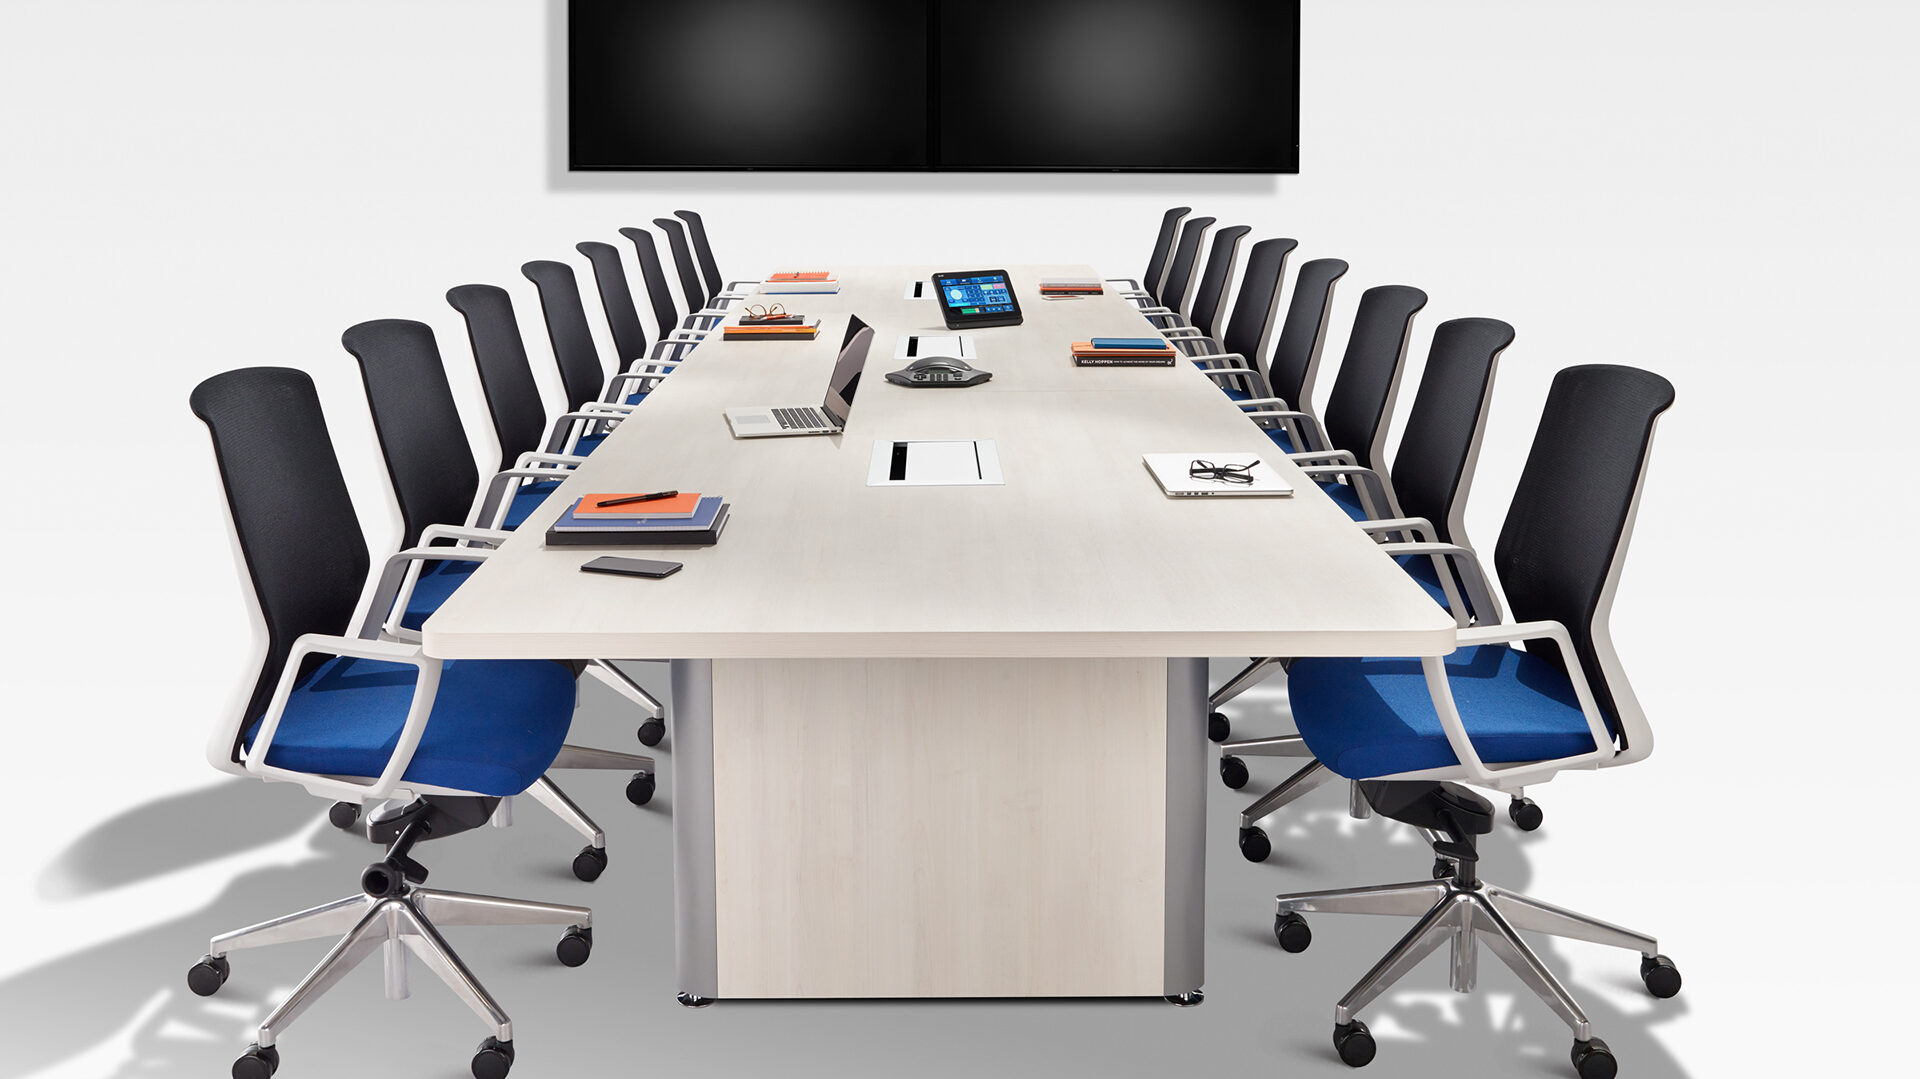 <h1>A Guide to Building the best Conference Room for your Workspace</h1>